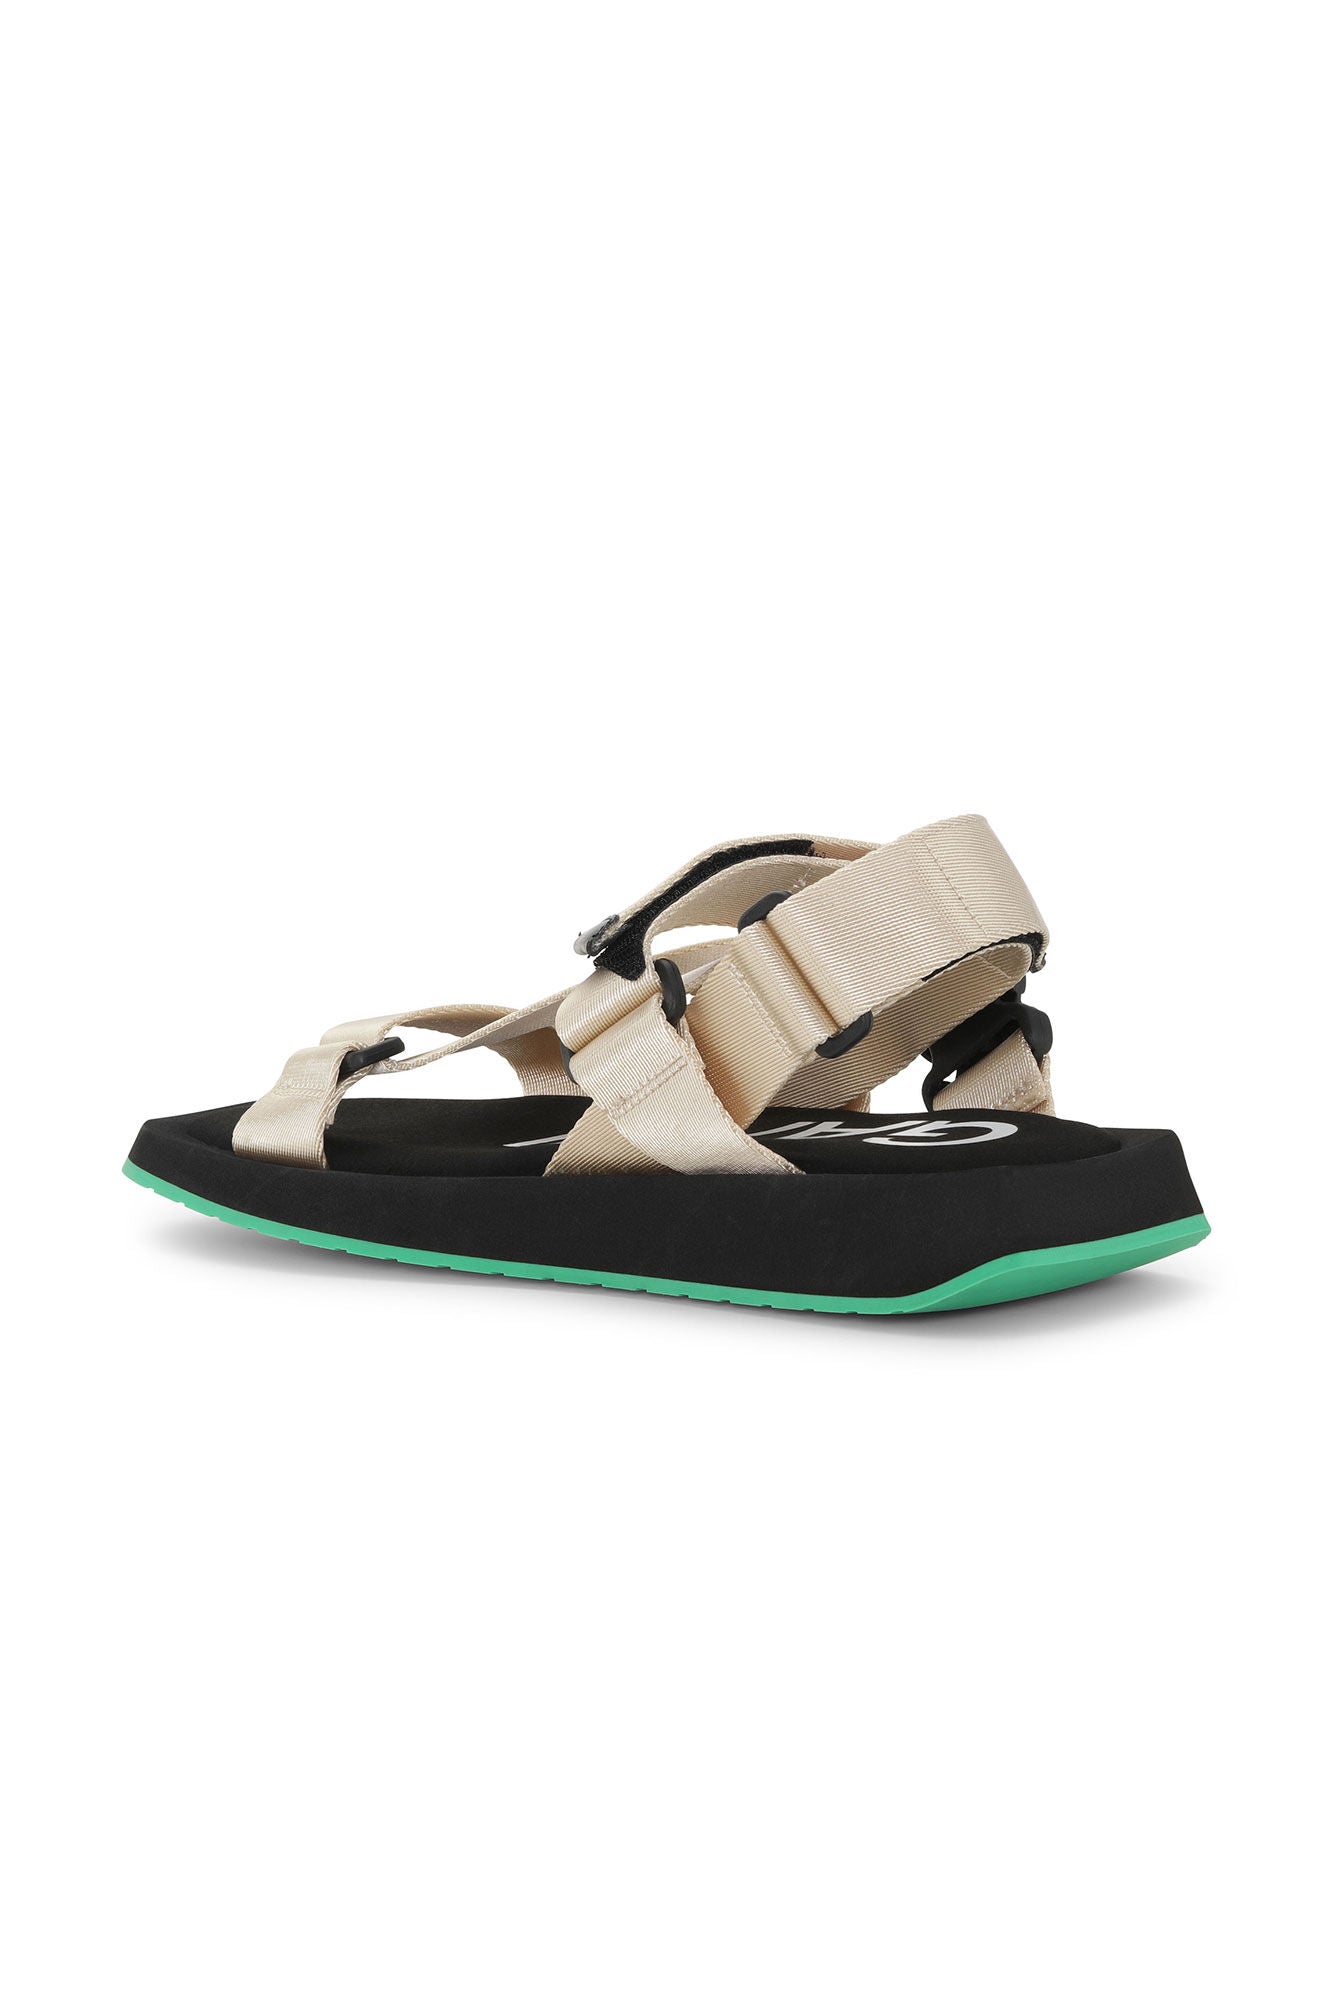 Performance Webbed Sandal in Oyster Gray